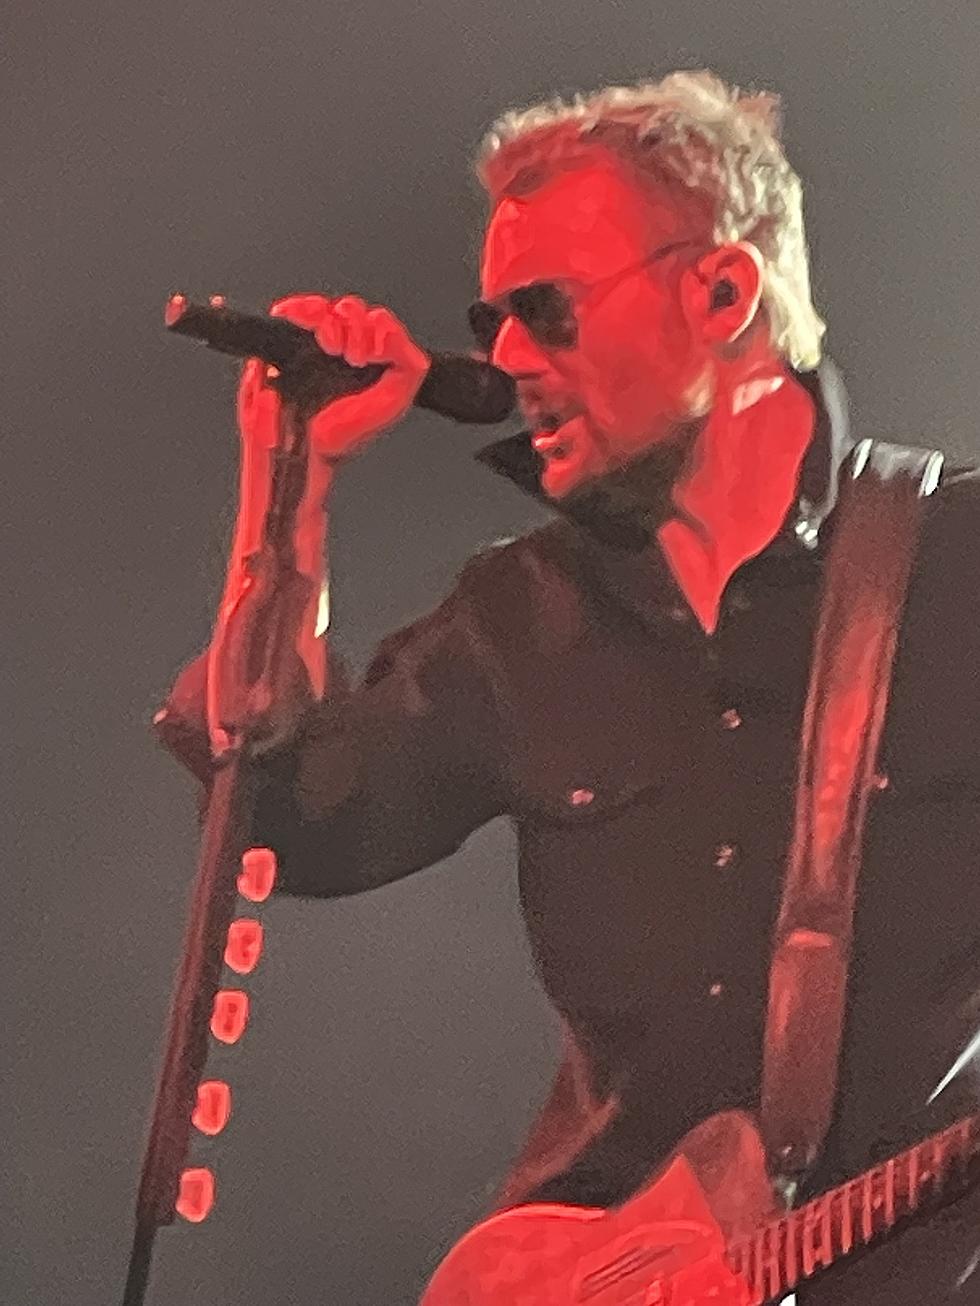 Great Eric Church Show Over weekend, Some Others On The Way